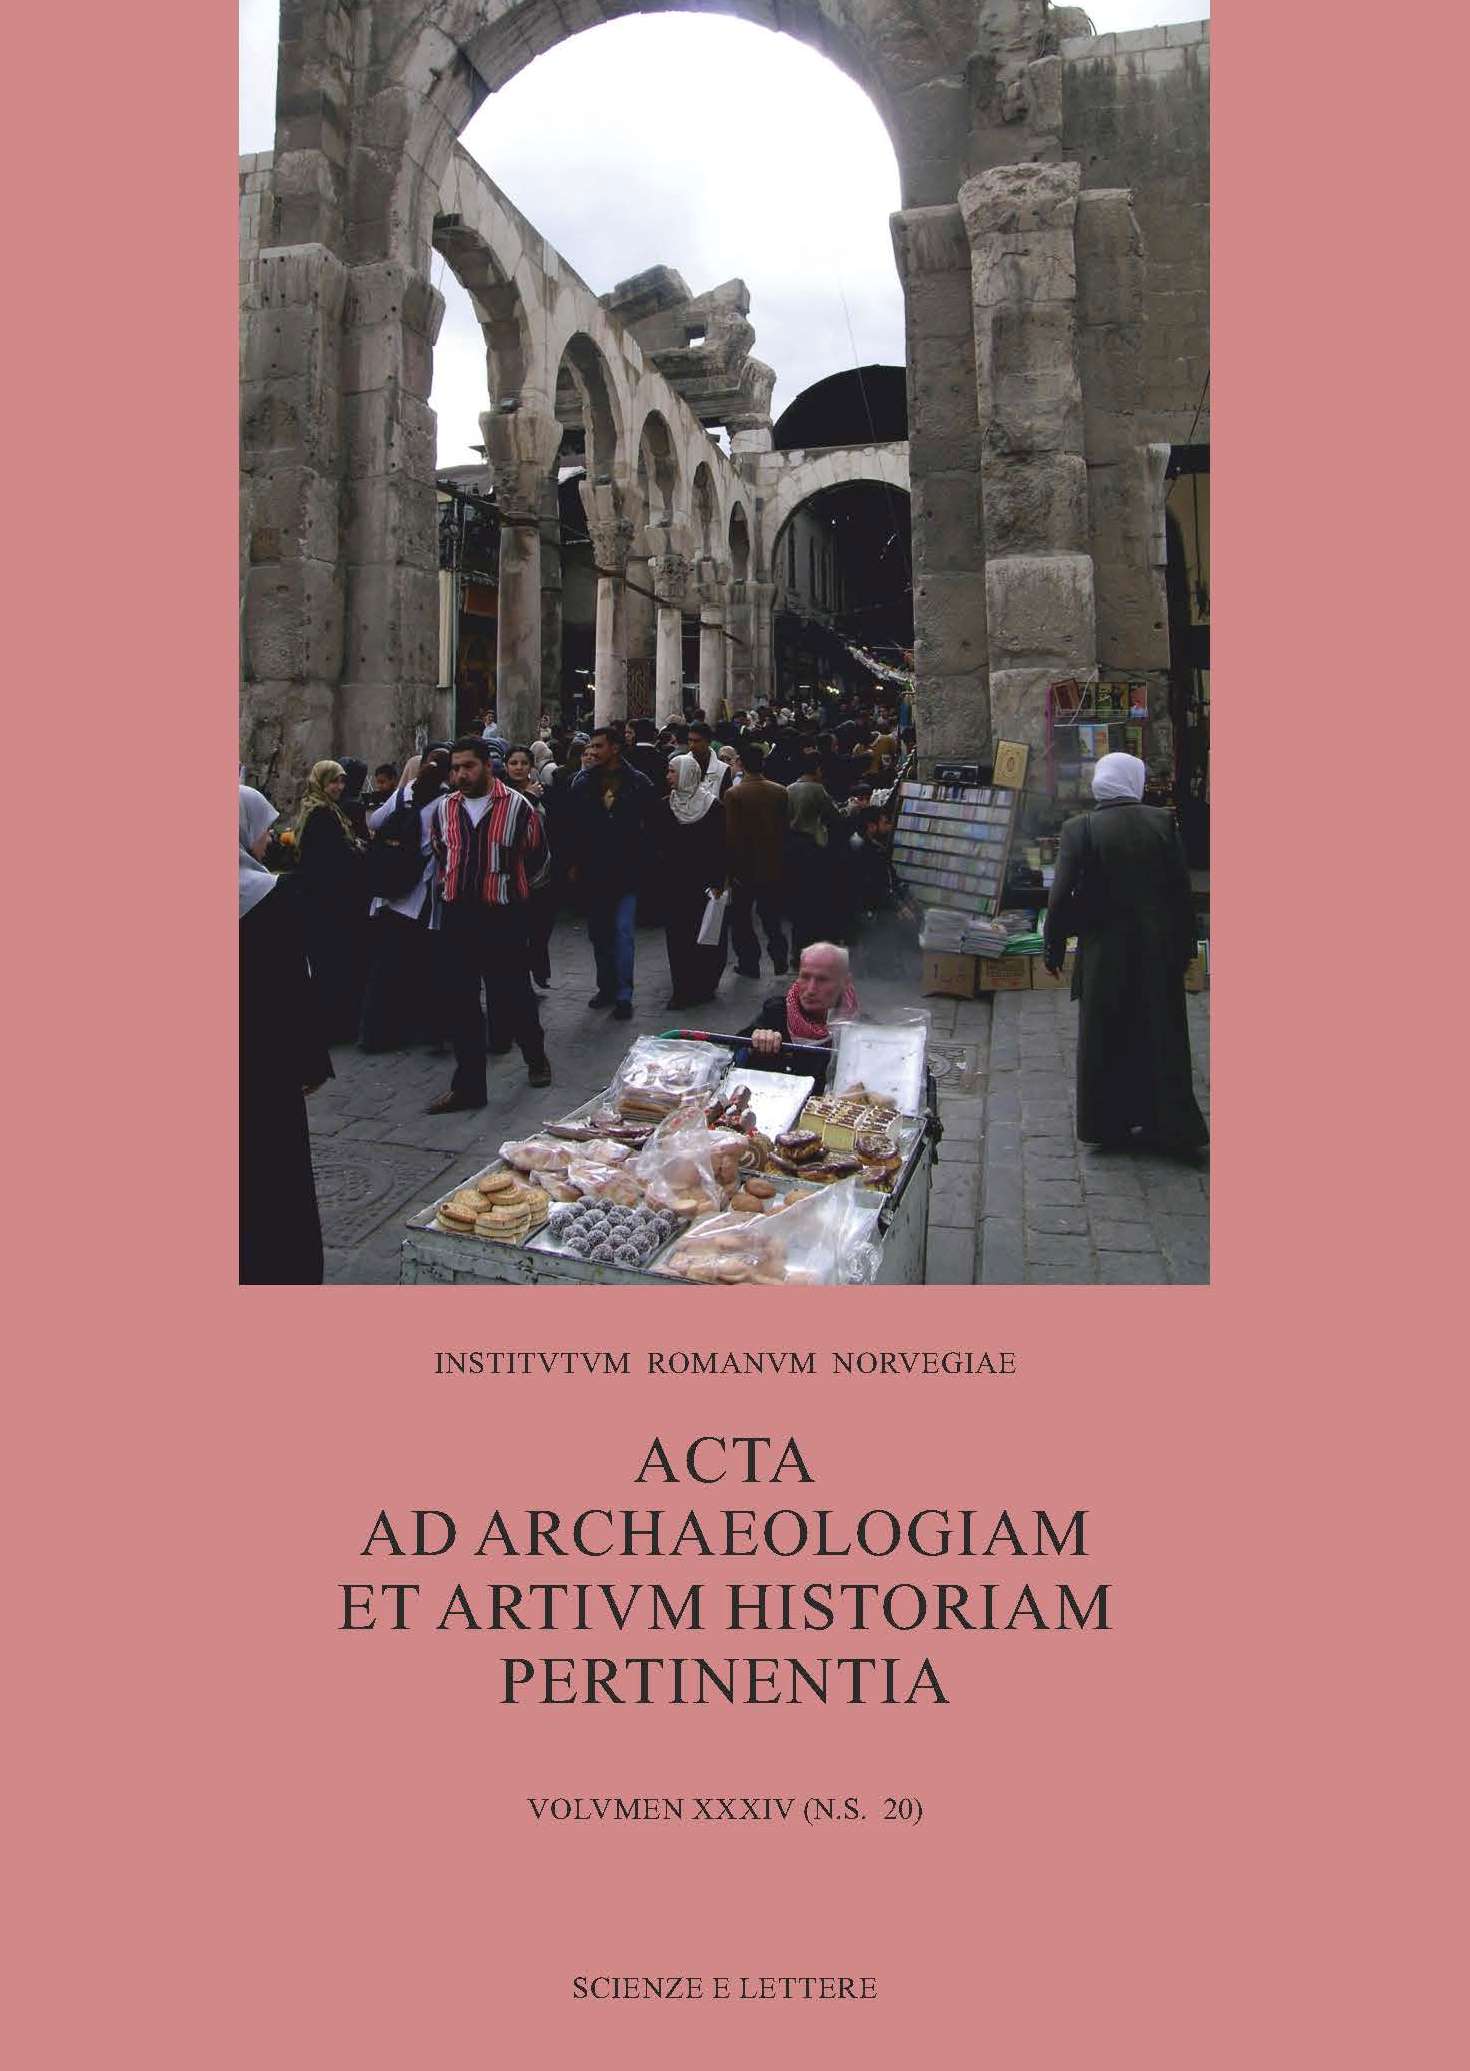 City, Hinterland and Environment:
Urban Resilience during the First Millennium Transition<br/>
Acta ad Archaeologiam et Artivm Historiam Pertinentia - Volvmen XXXIV (n.s. 20) 